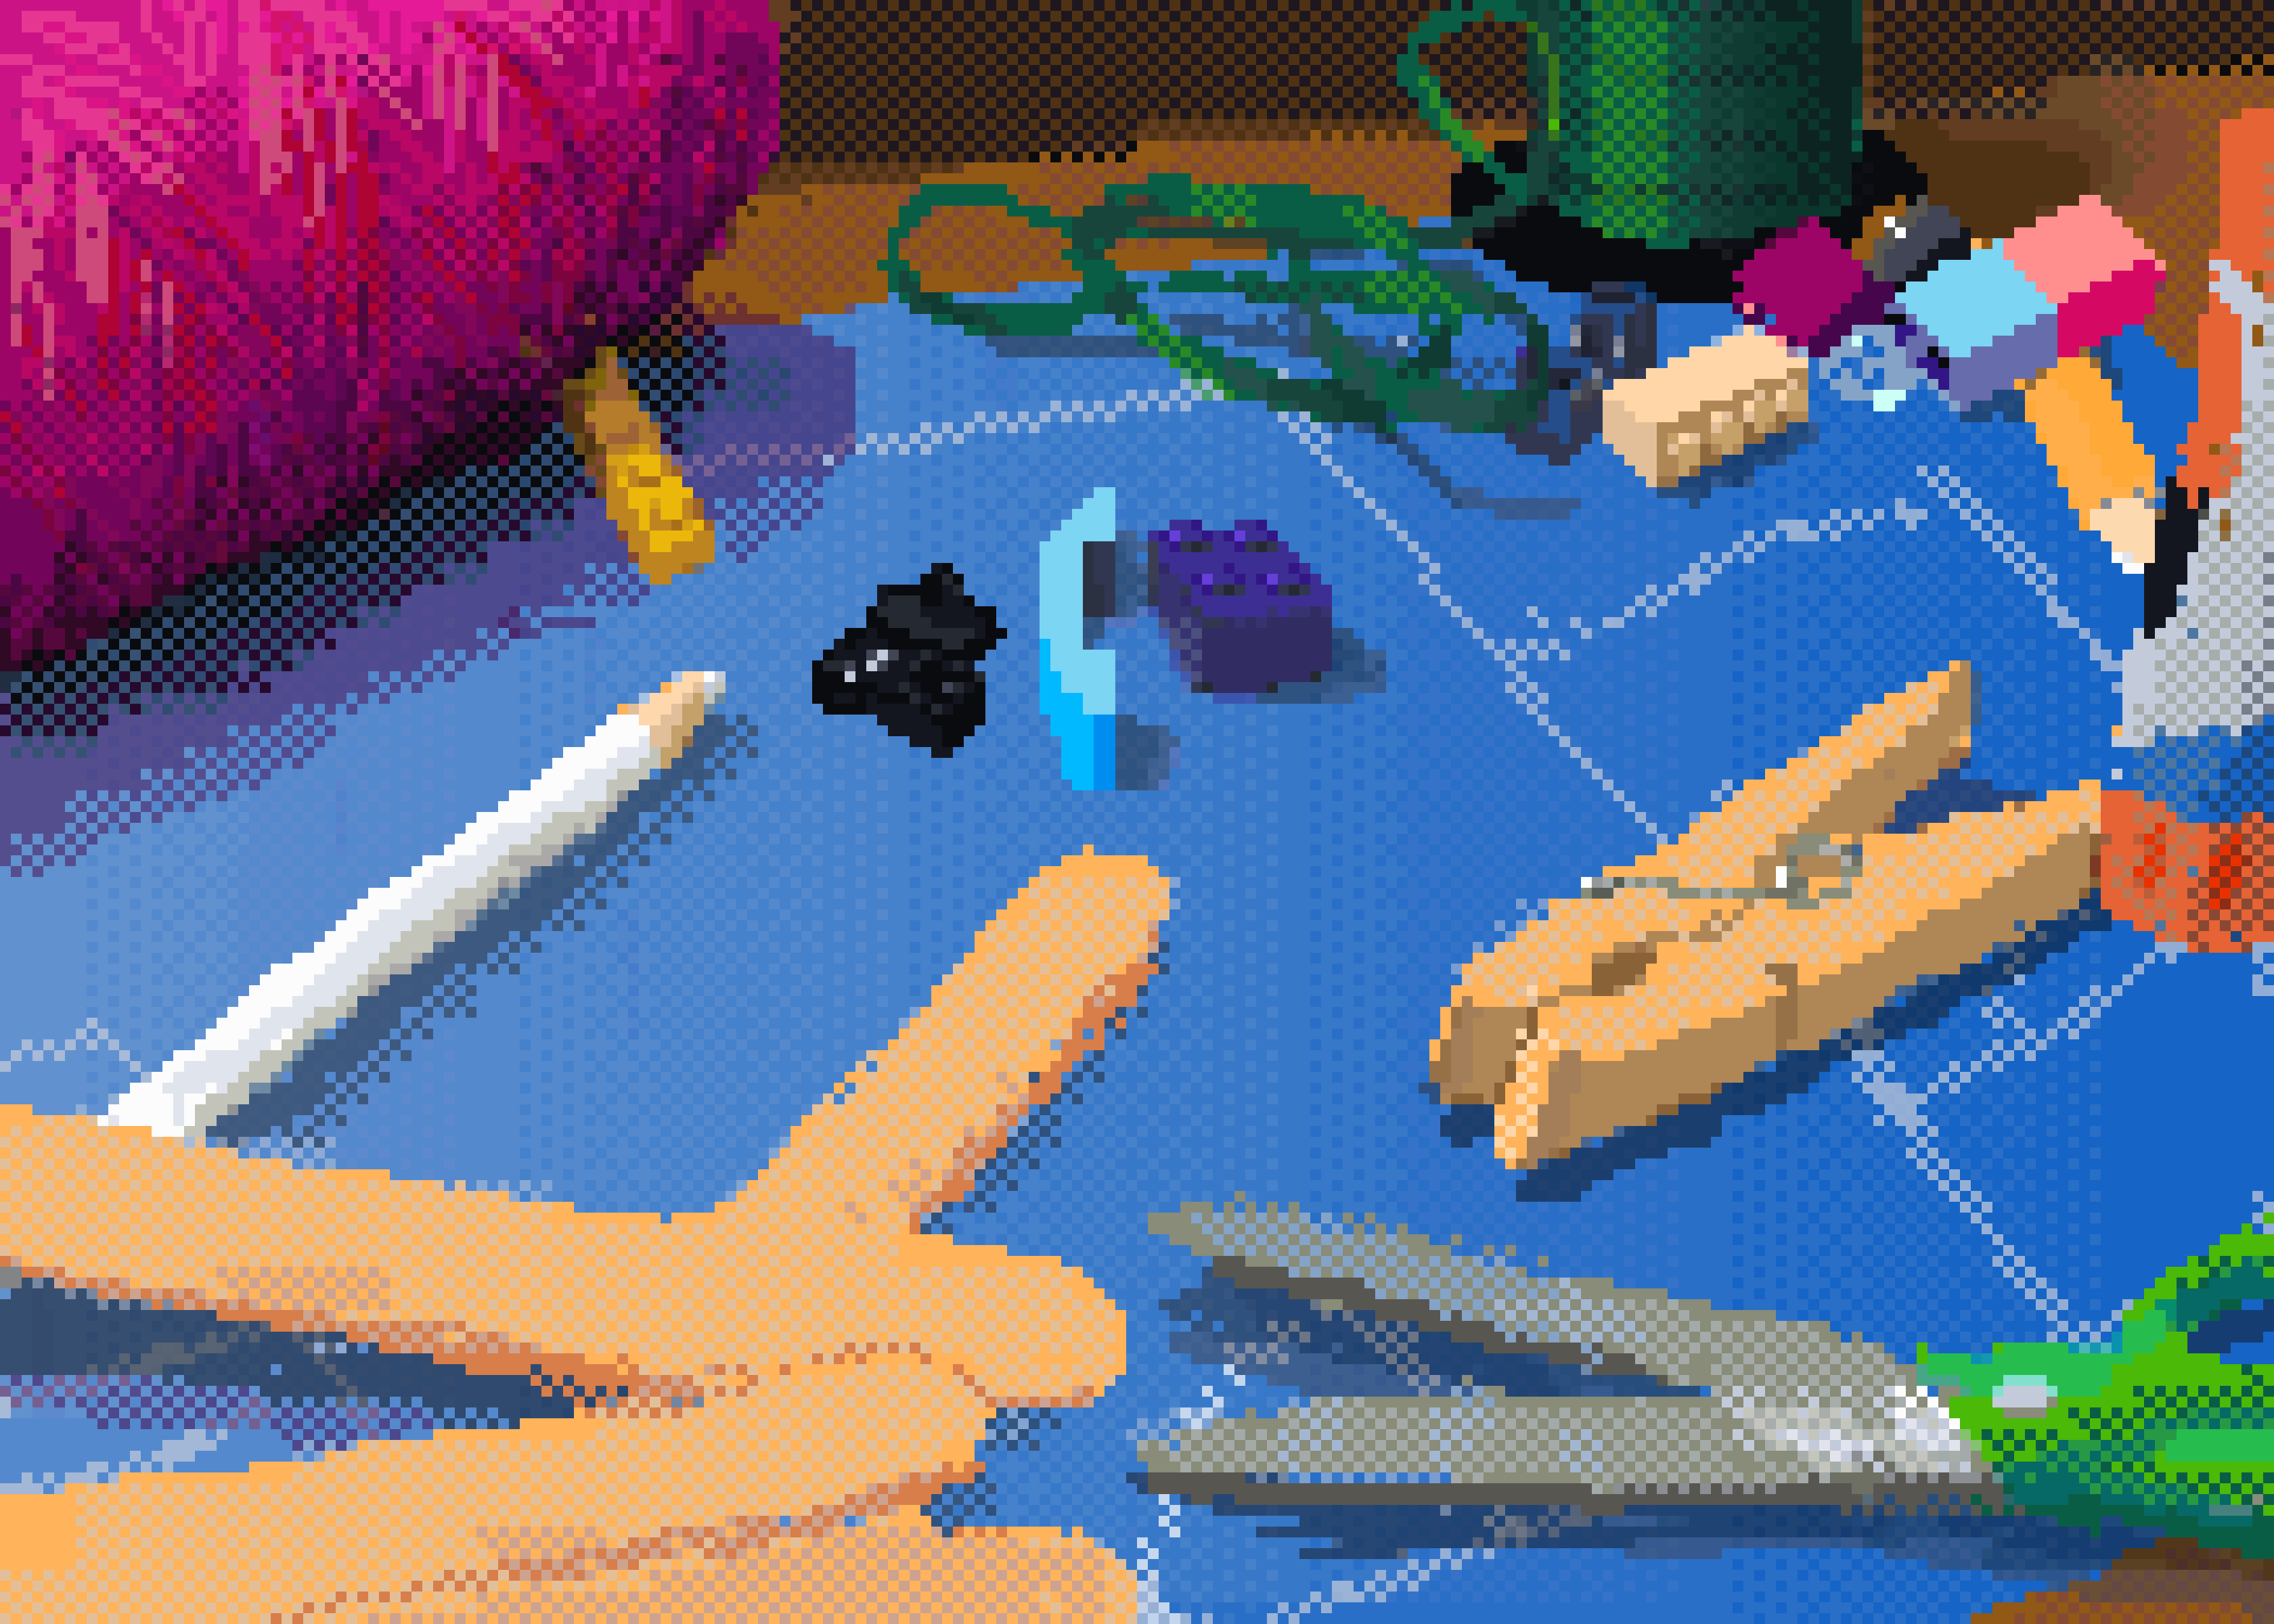 A pixel art still life of various art supplies over what appears to be a blueprint. Some of the items on display: a spool of pink yarn, a spool of green ribbon, popsicle sticks, a clothes hanger, plastic building blocks, a glue stick, safety scissors, and a pencil.